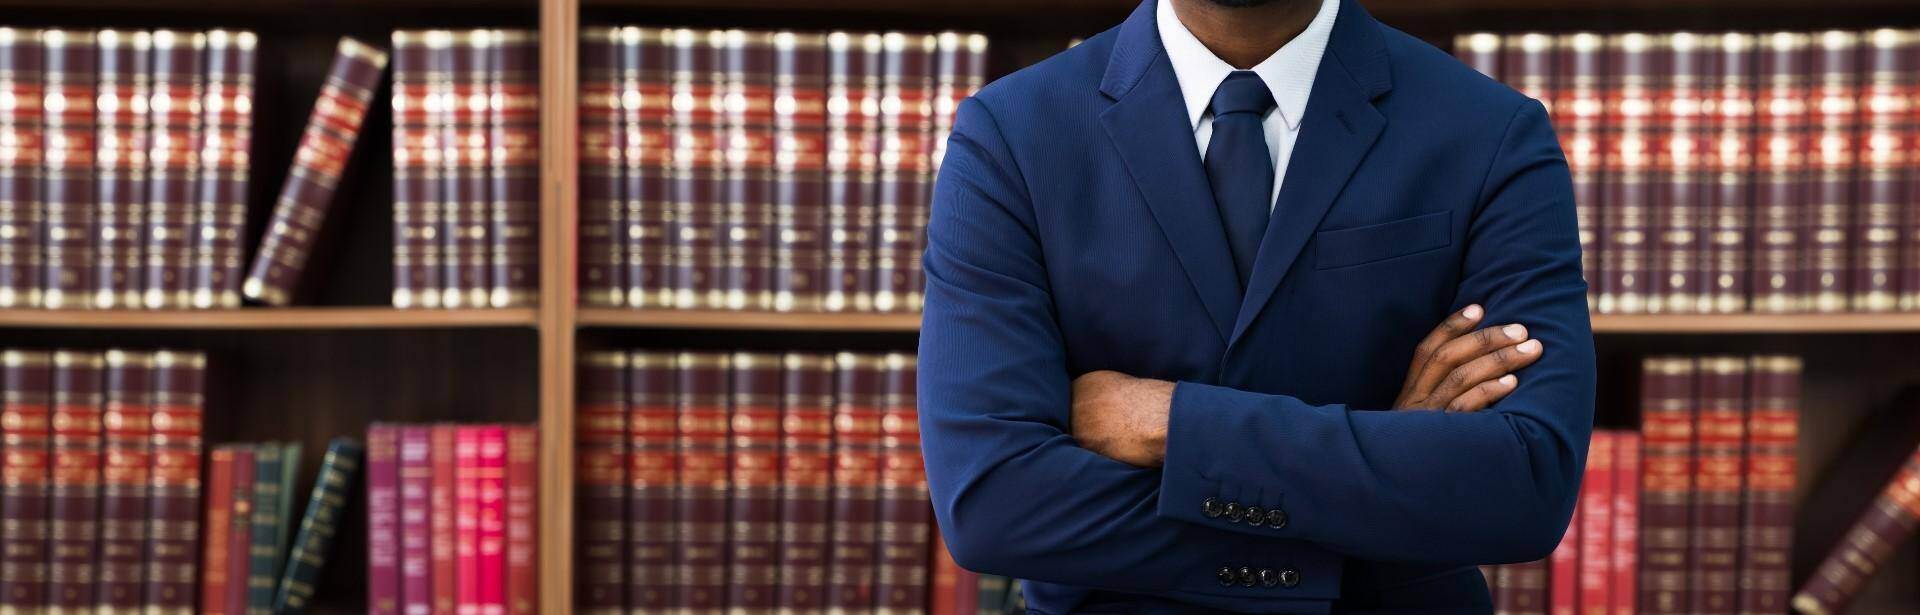 A black lawyer standing in front of a bookshelf of law book in Johns-Creek, Georgia